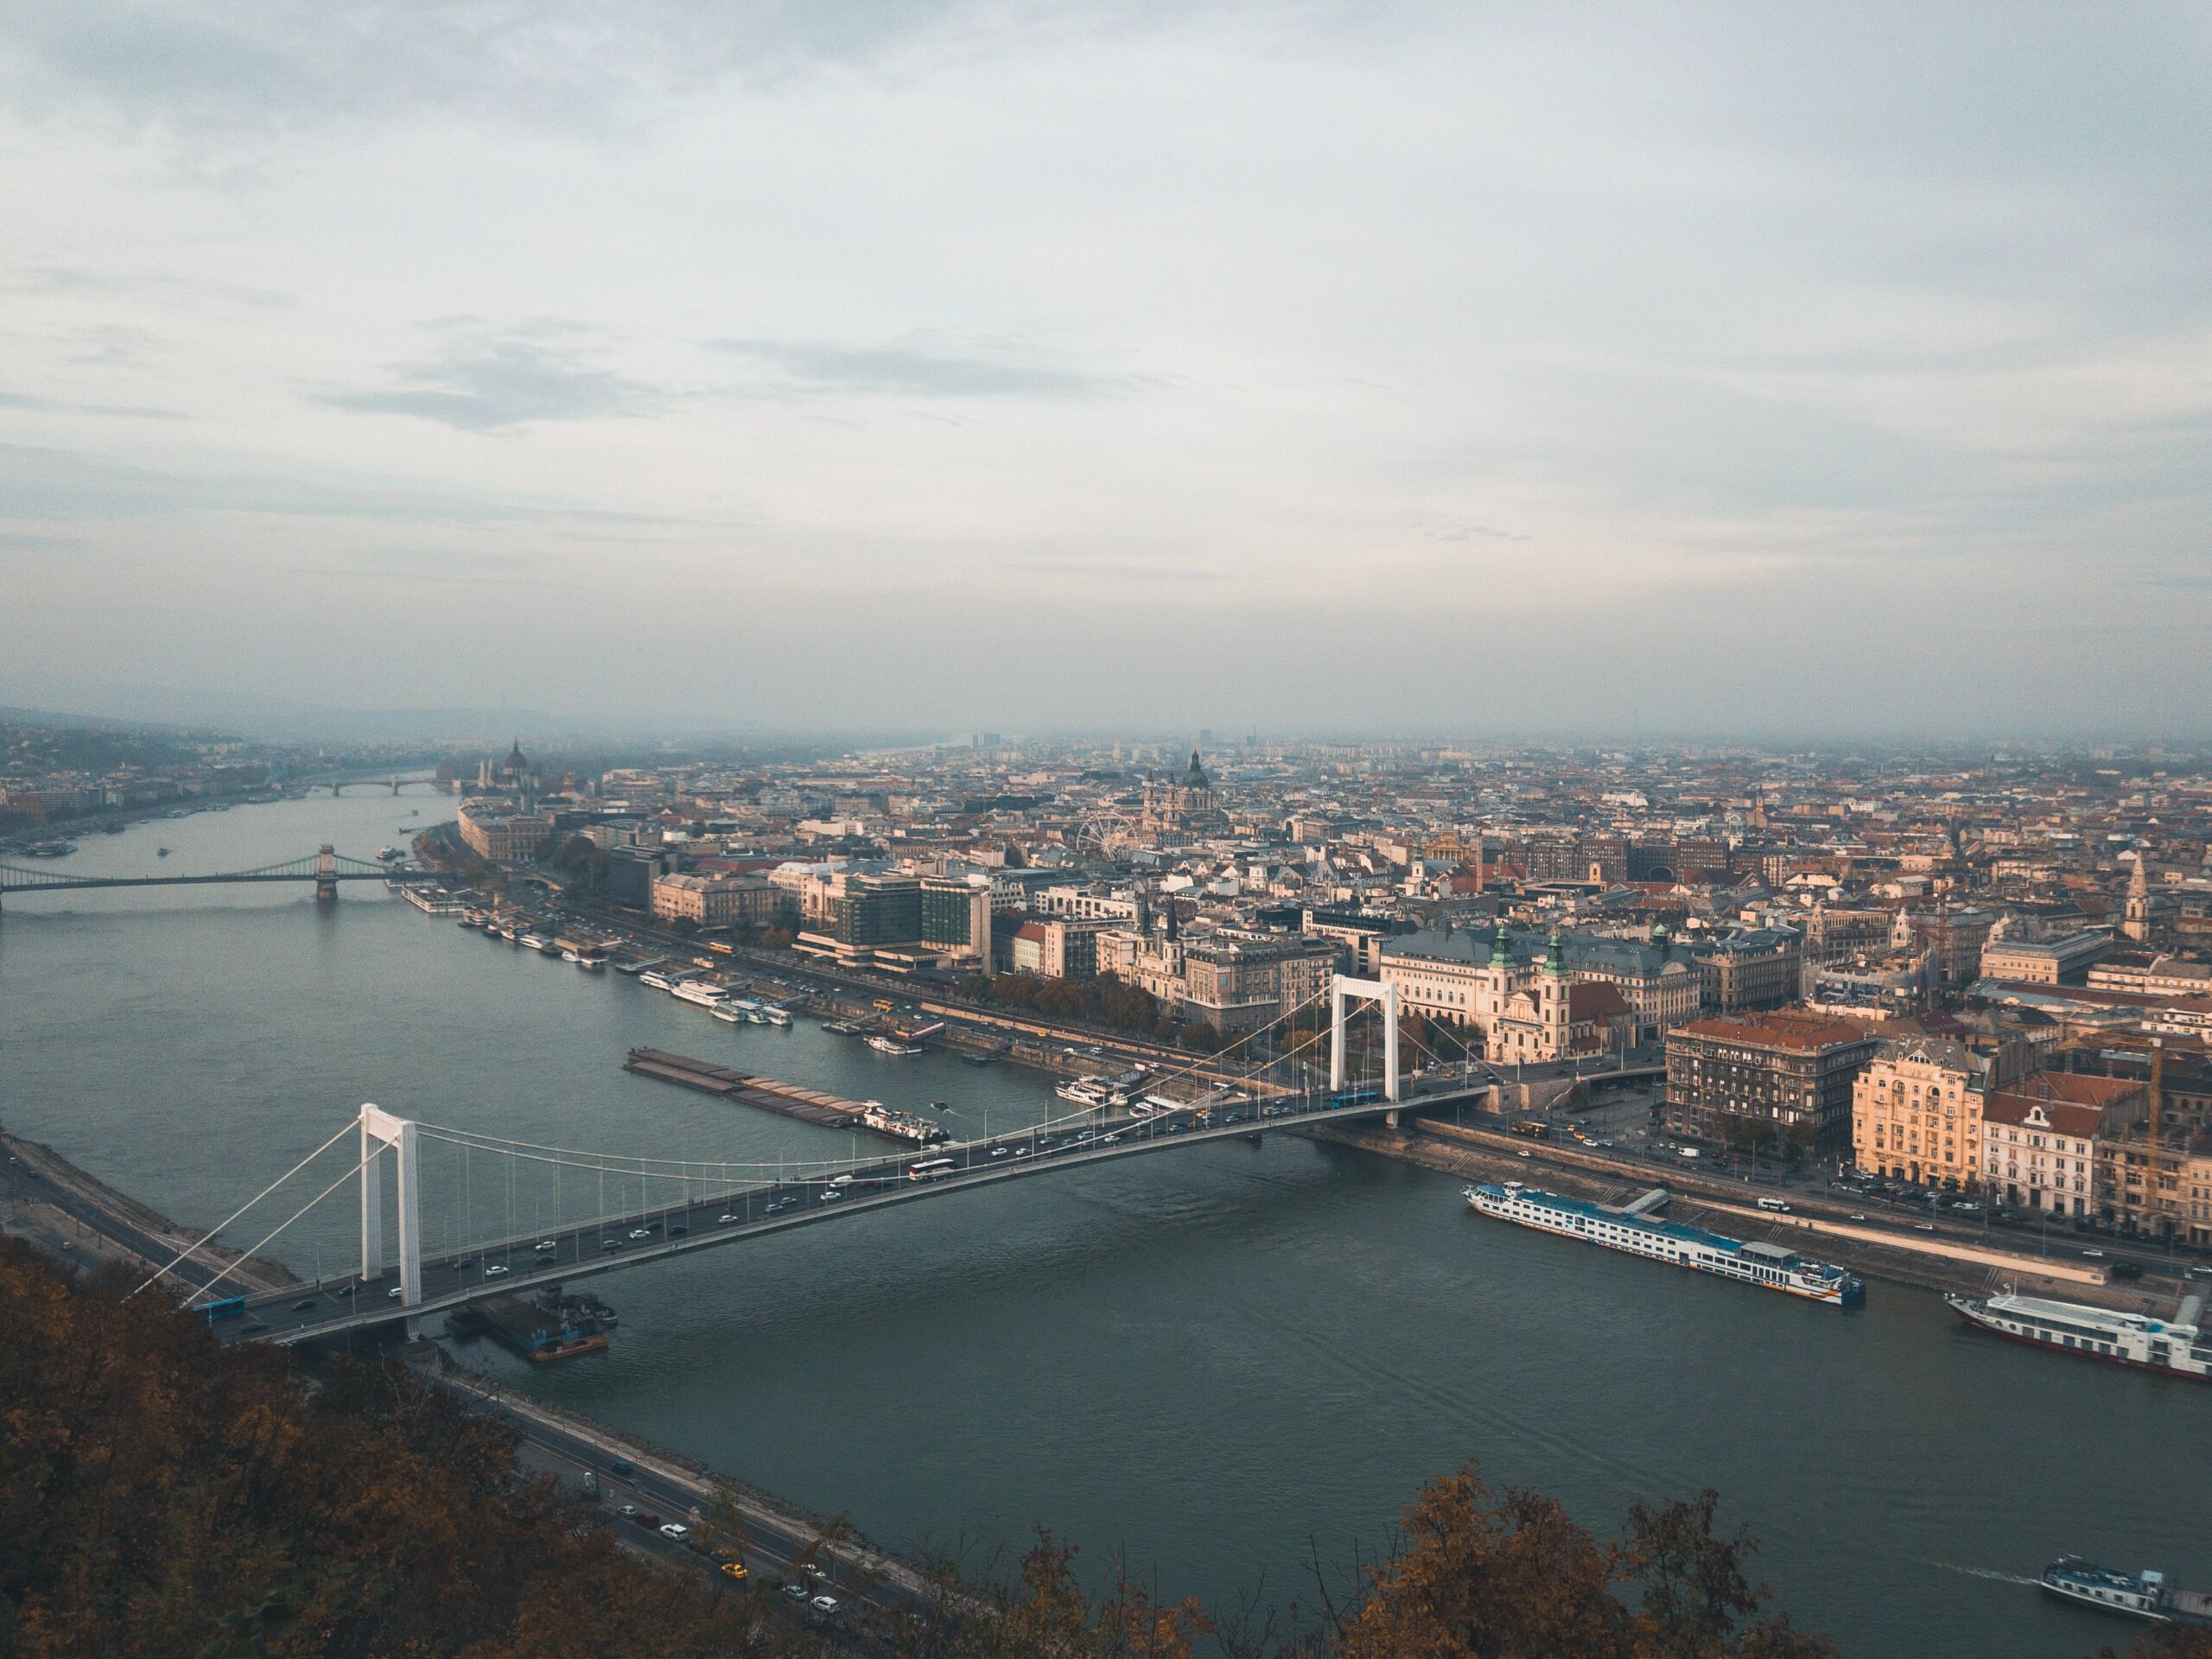 Elizabeth Bridge from the distance in Budapest, Hungary